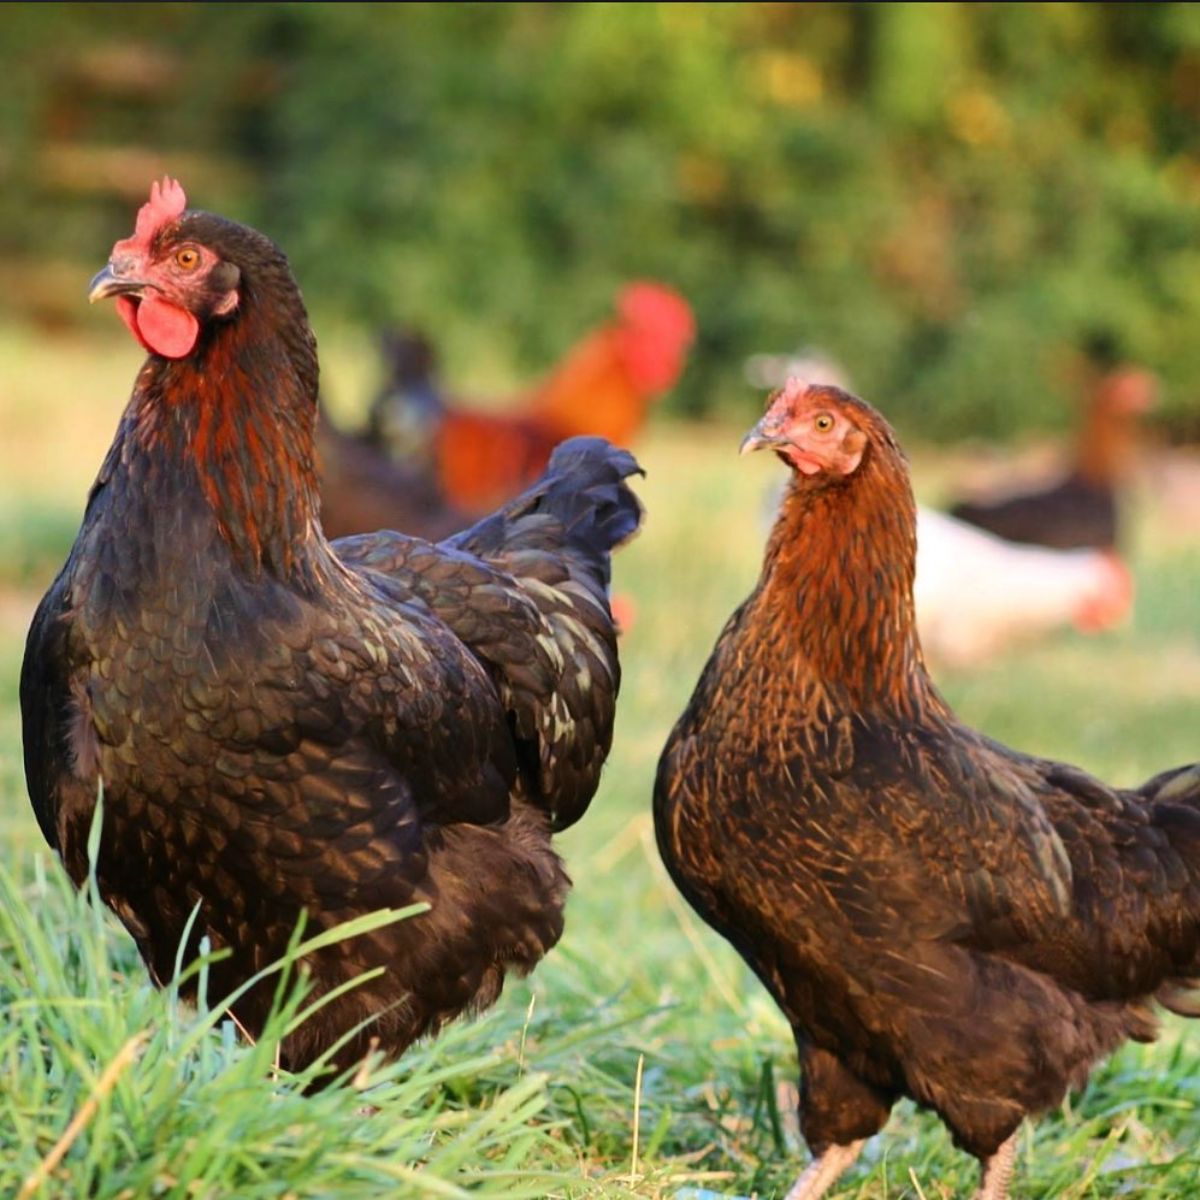 Two adorable Burford Brown hens on a pasture.